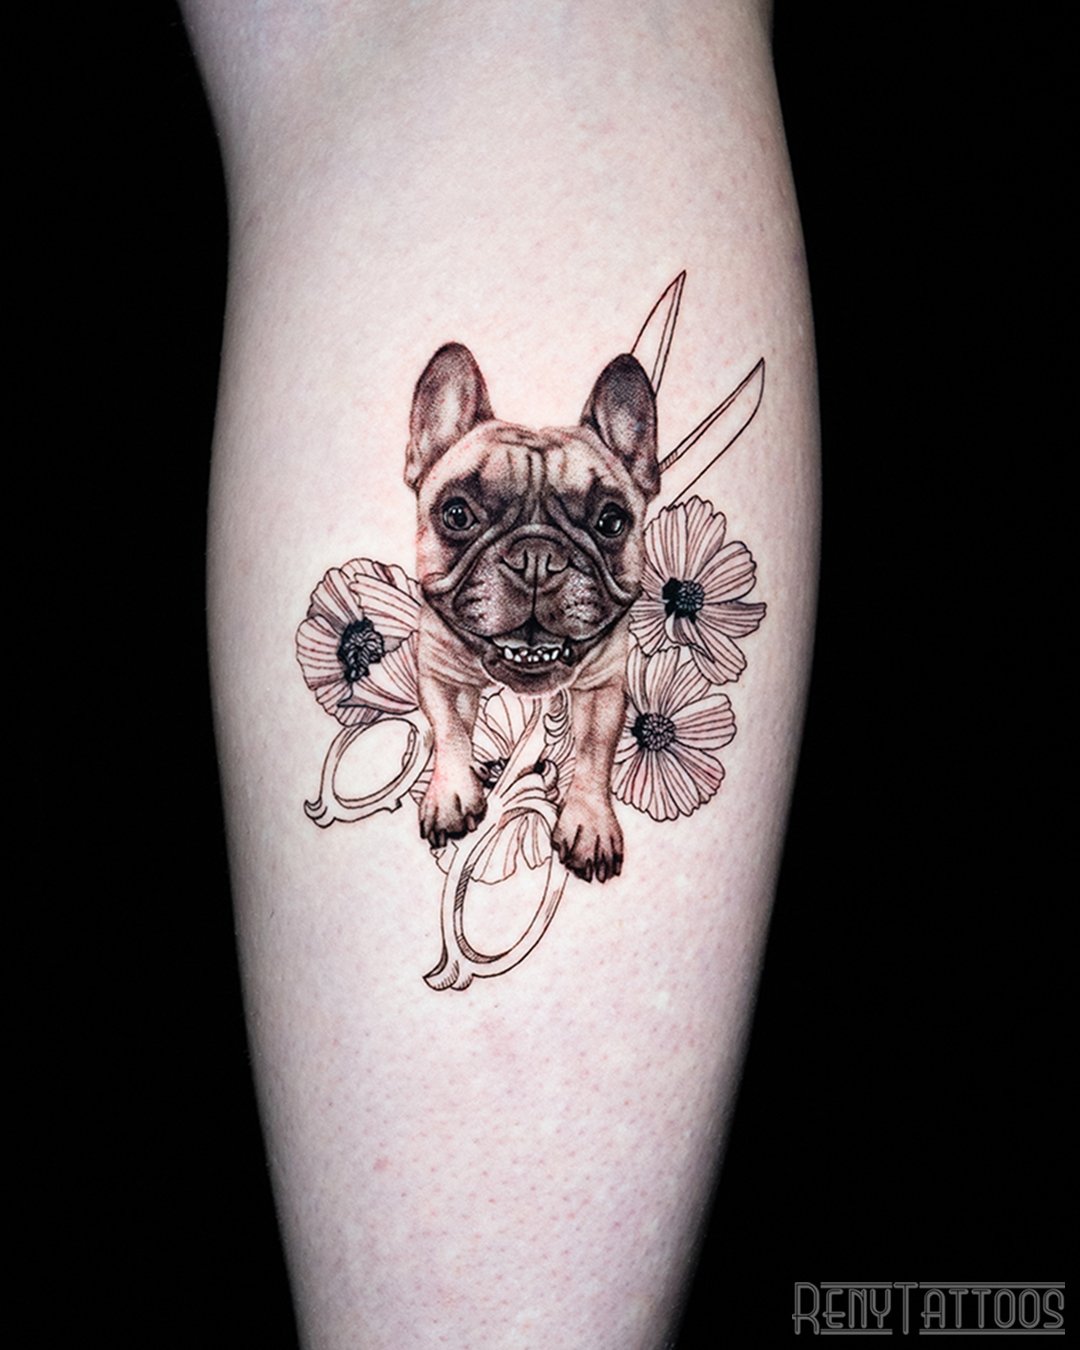 100 Adorable Dog Tattoos That Will Melt Your Heart  Tattoo Me Now